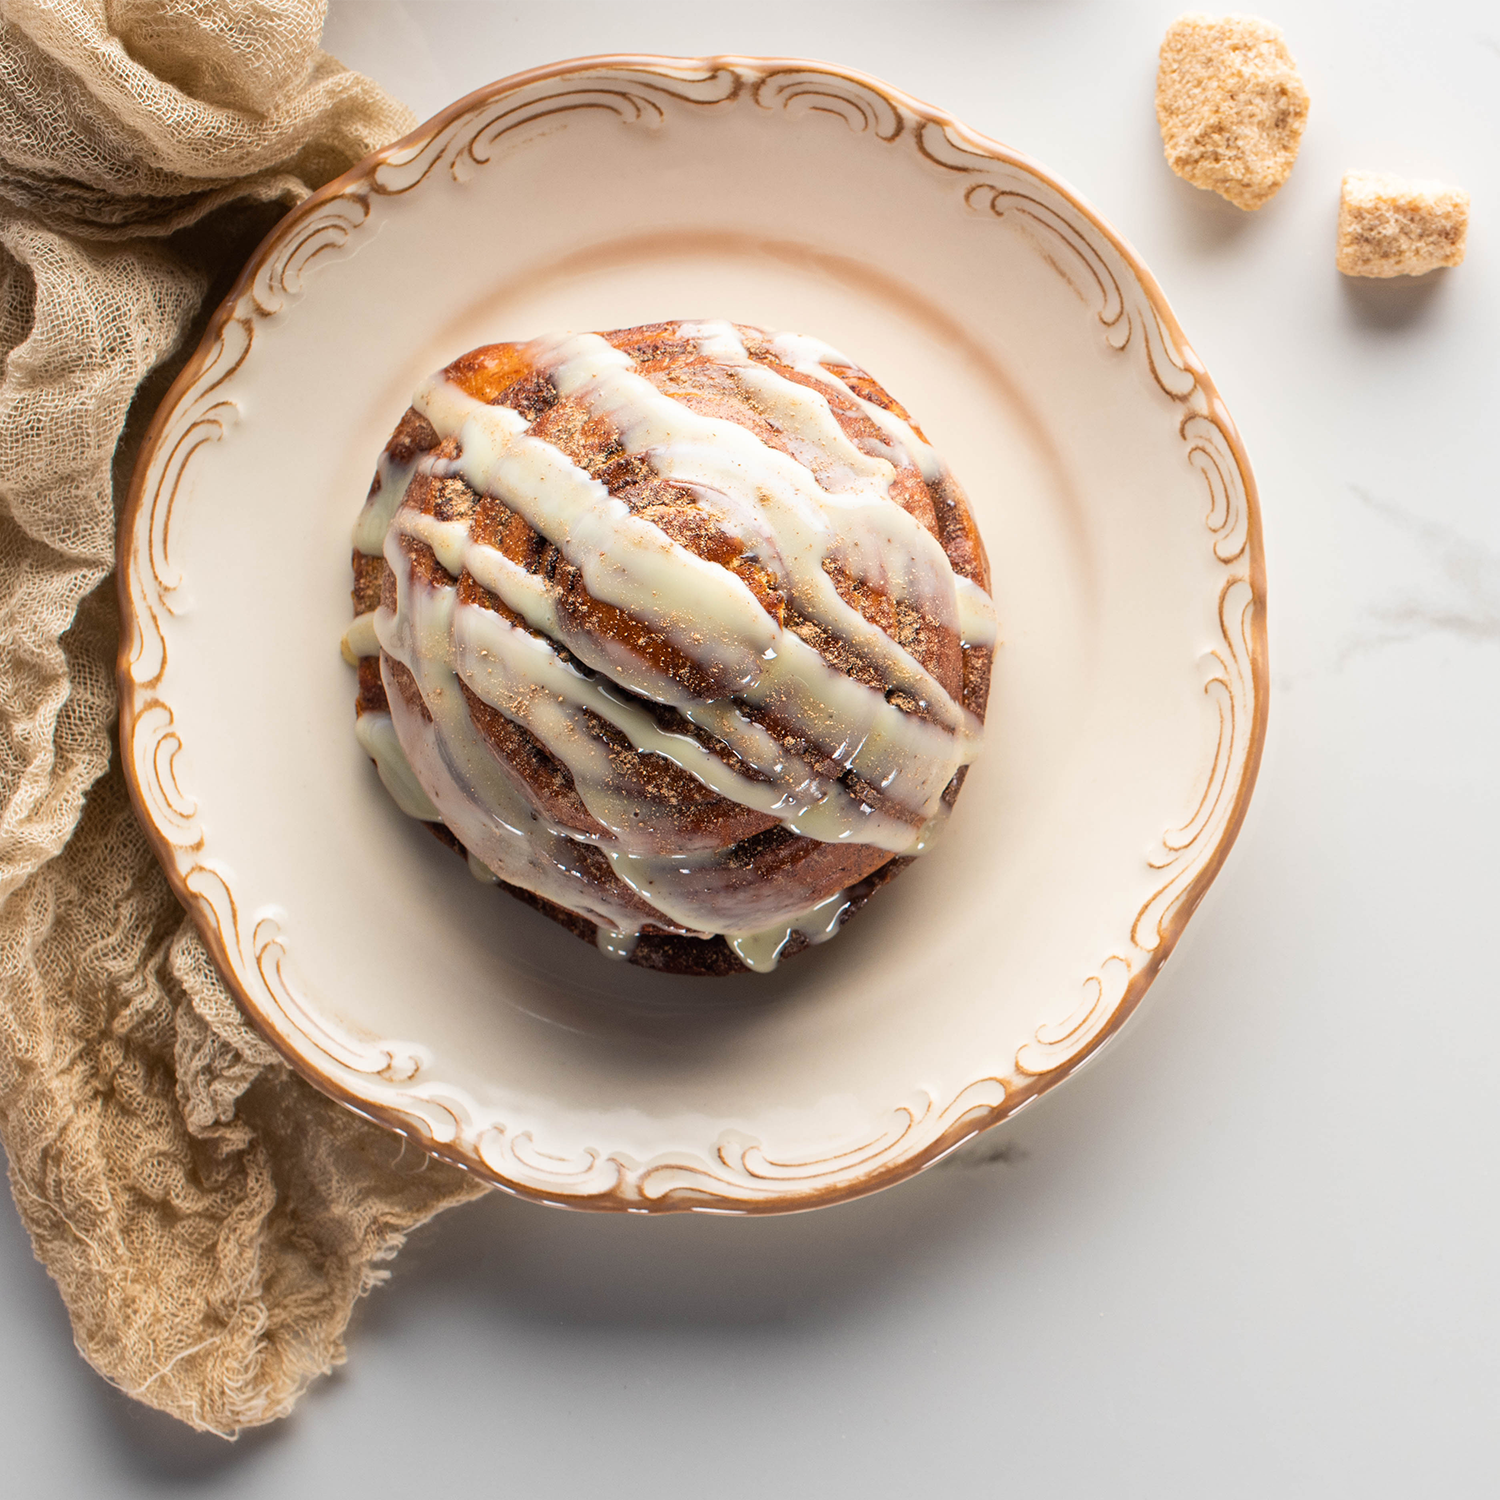 Product Description: Indulge in the delectable delight of a freshly baked cinnamon roll. This irresistible treat features a perfect balance of warm, gooey cinnamon goodness swirled within soft, fluffy Dessert For Two Long-Lasting Scented Jar Candle (14 oz) from Tuscany Candle® SEASONAL.